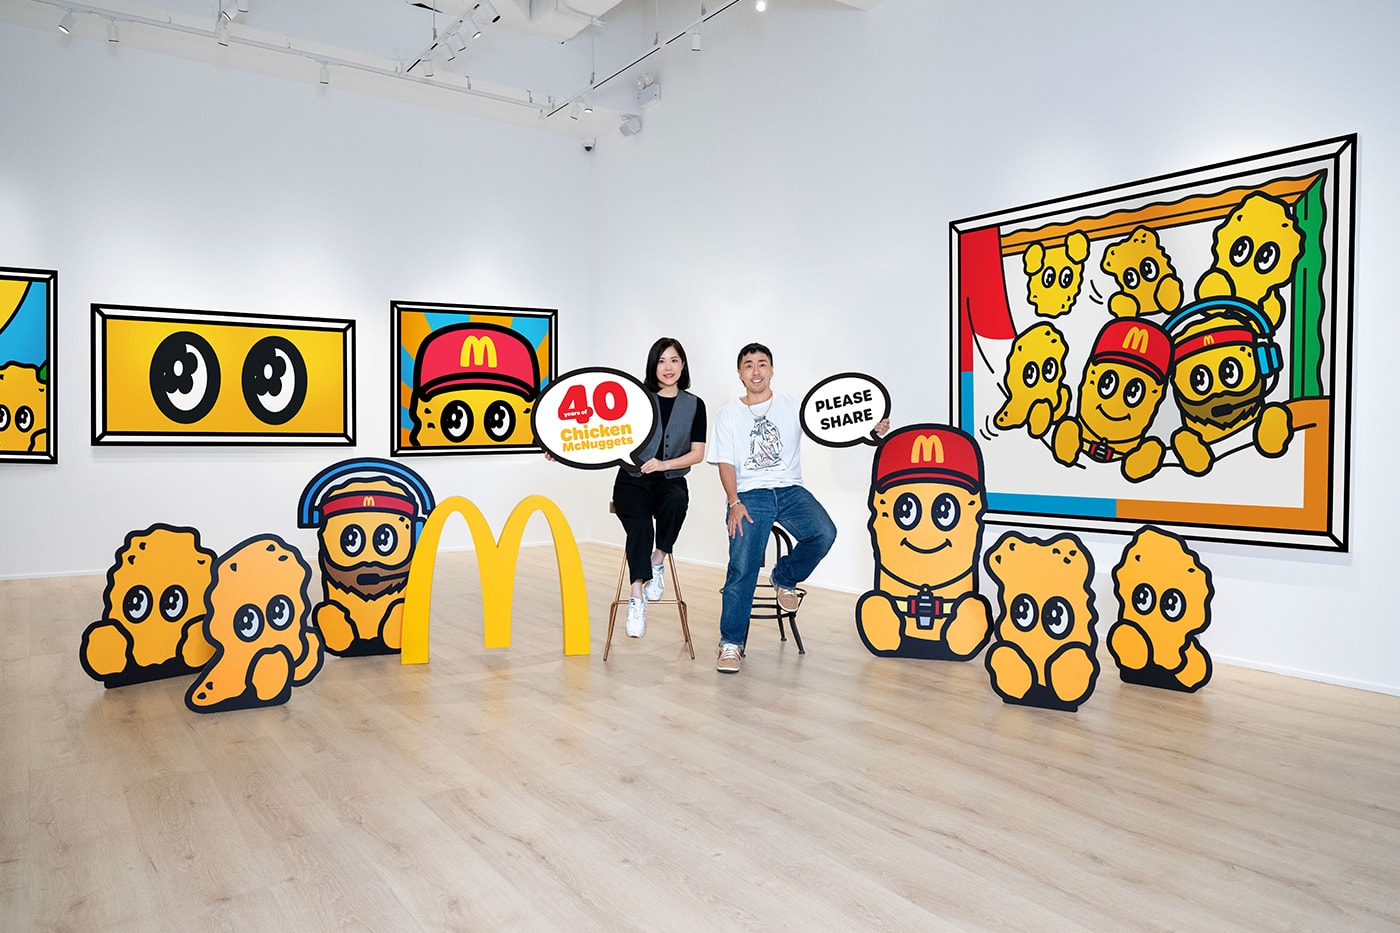 McDonald’s Hong Kong Kevin Poon Coach McNugget Art World Exhibition Look Inside Info Vandy The Pink Jon Burgerman UFO907 Gyuhan Lee FrankNitty3000 Arts Pavilion West Kowloon Cultural District